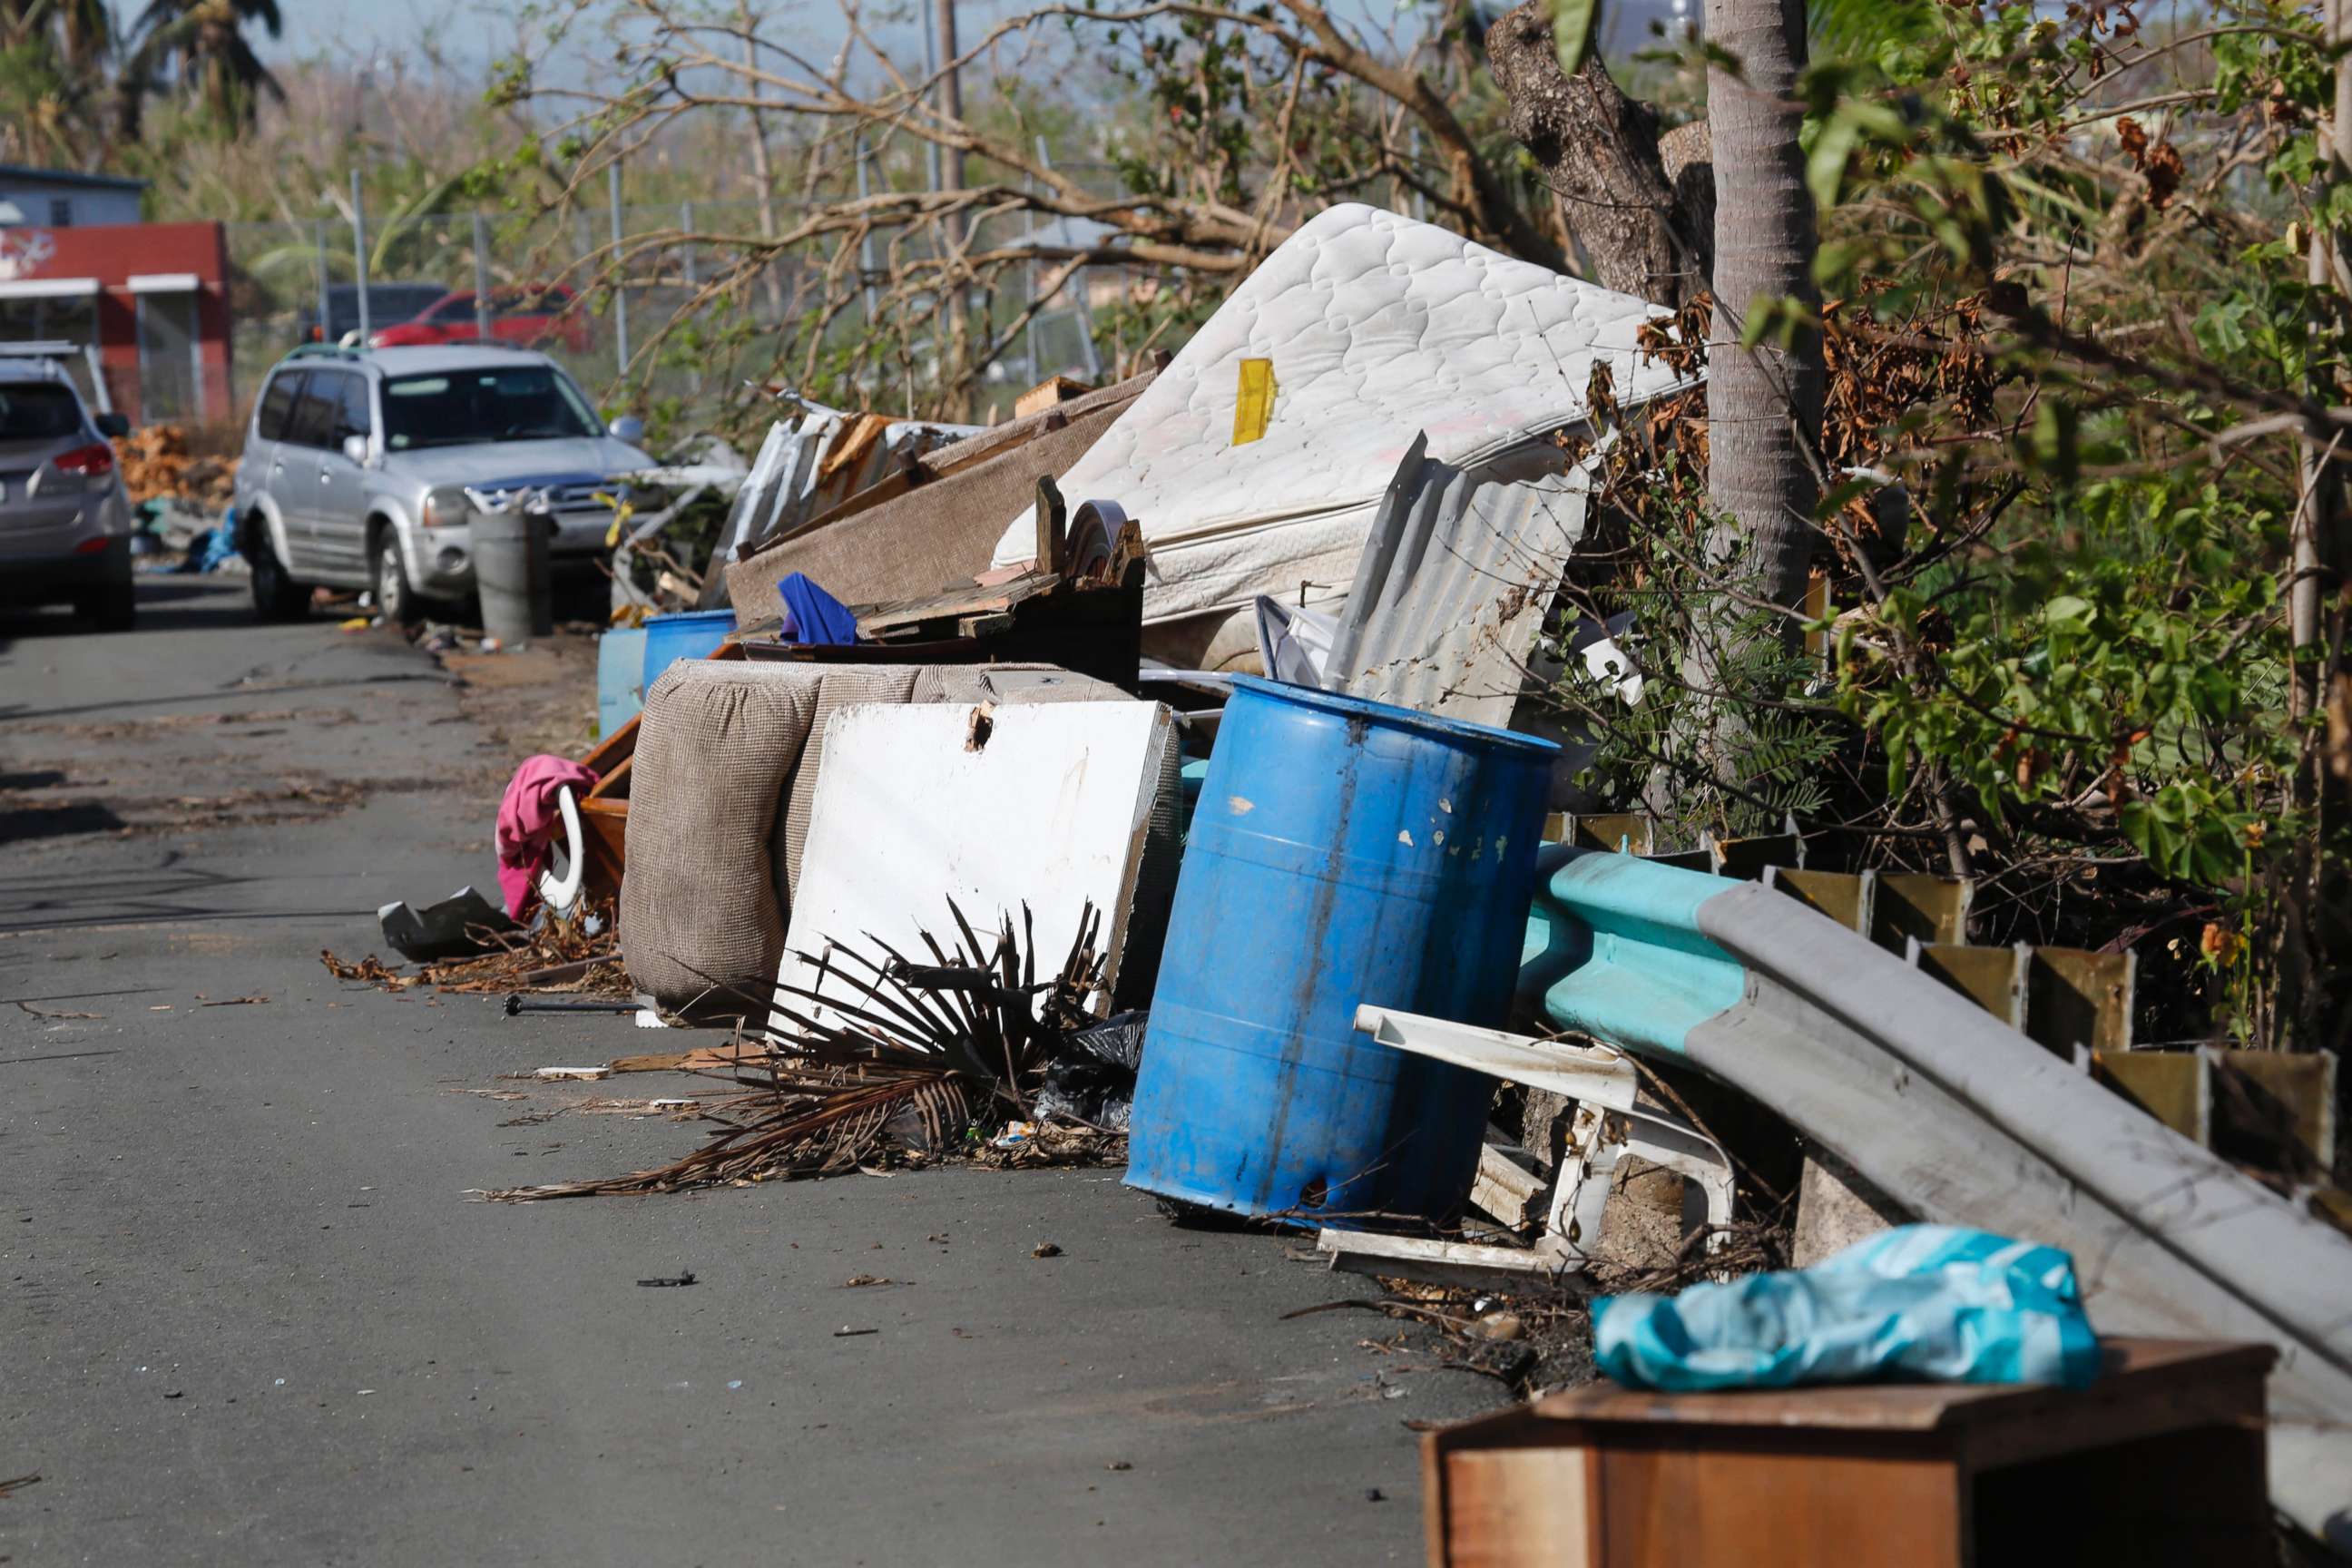 PHOTO: Possessions lost during Hurricane Maria line a street in Guaynabo, Puerto Rico, Oct. 2, 2017.

